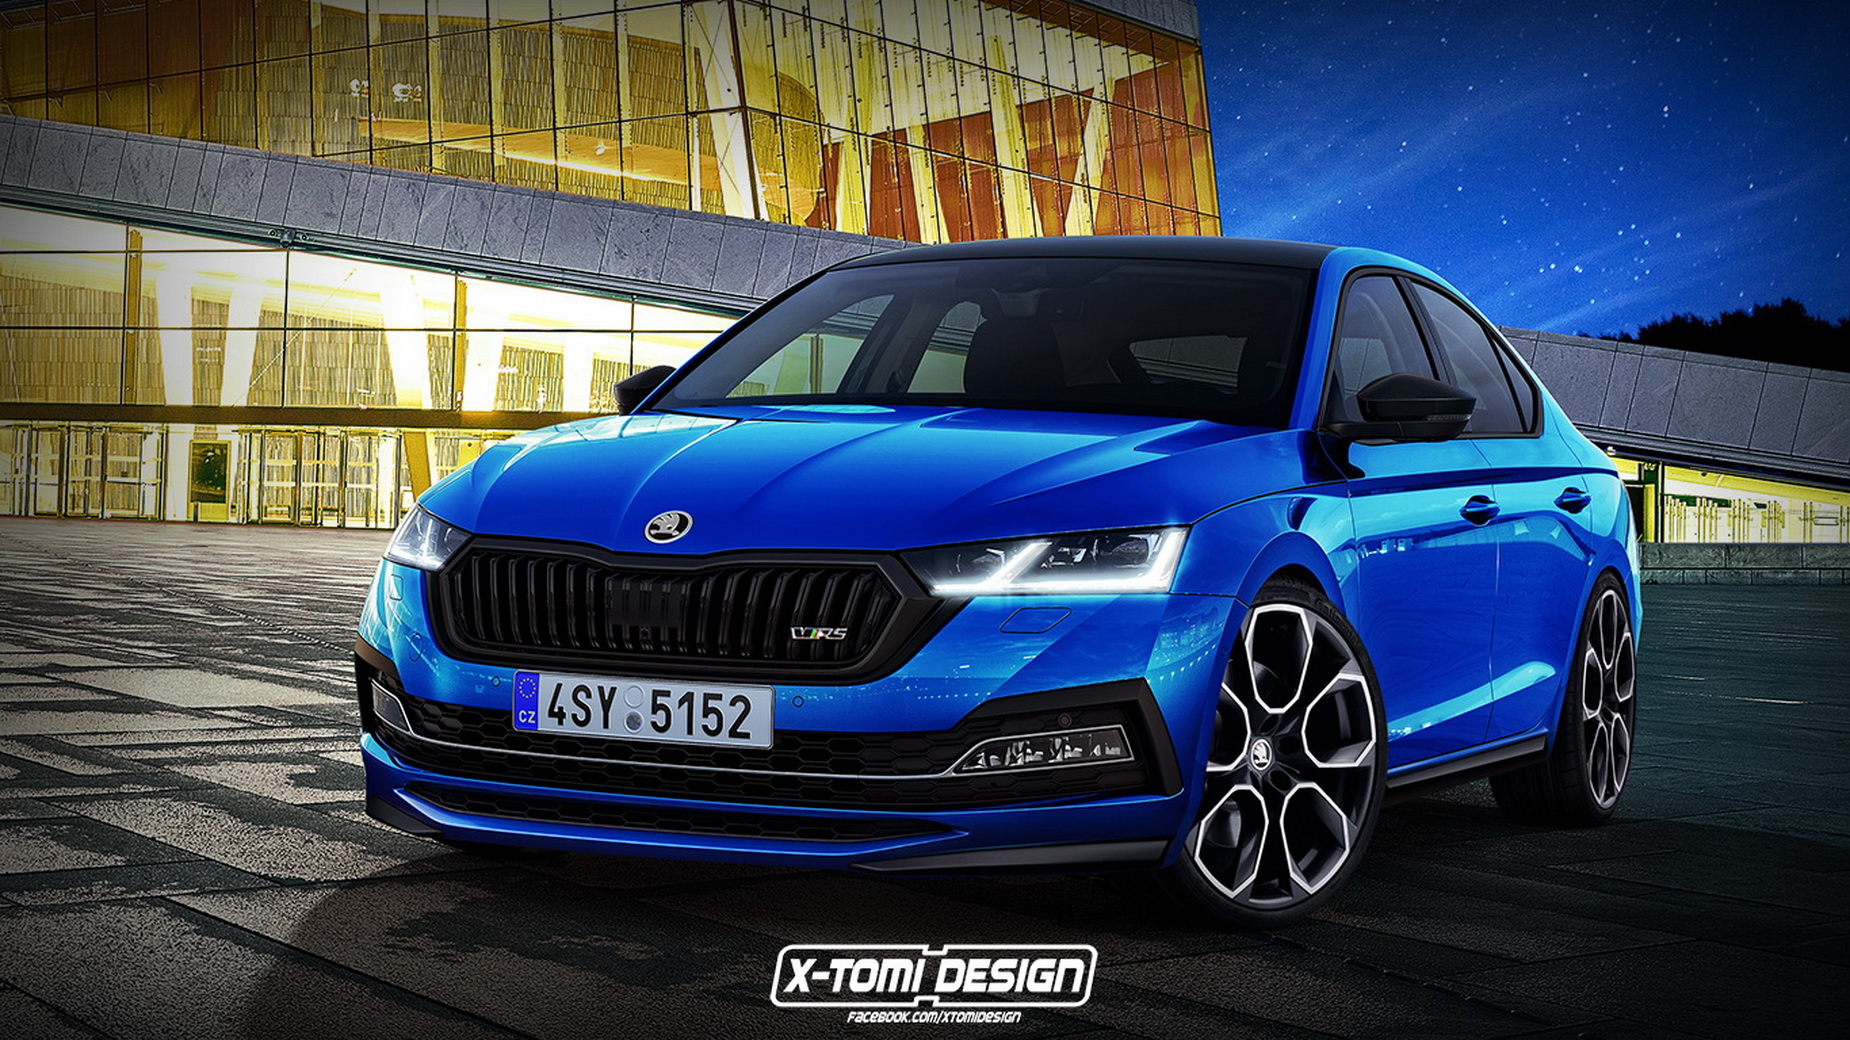 2020 Skoda Octavia RS To Follow Cupra Leon's Footsteps And Get A Plug-in  Hybrid Option